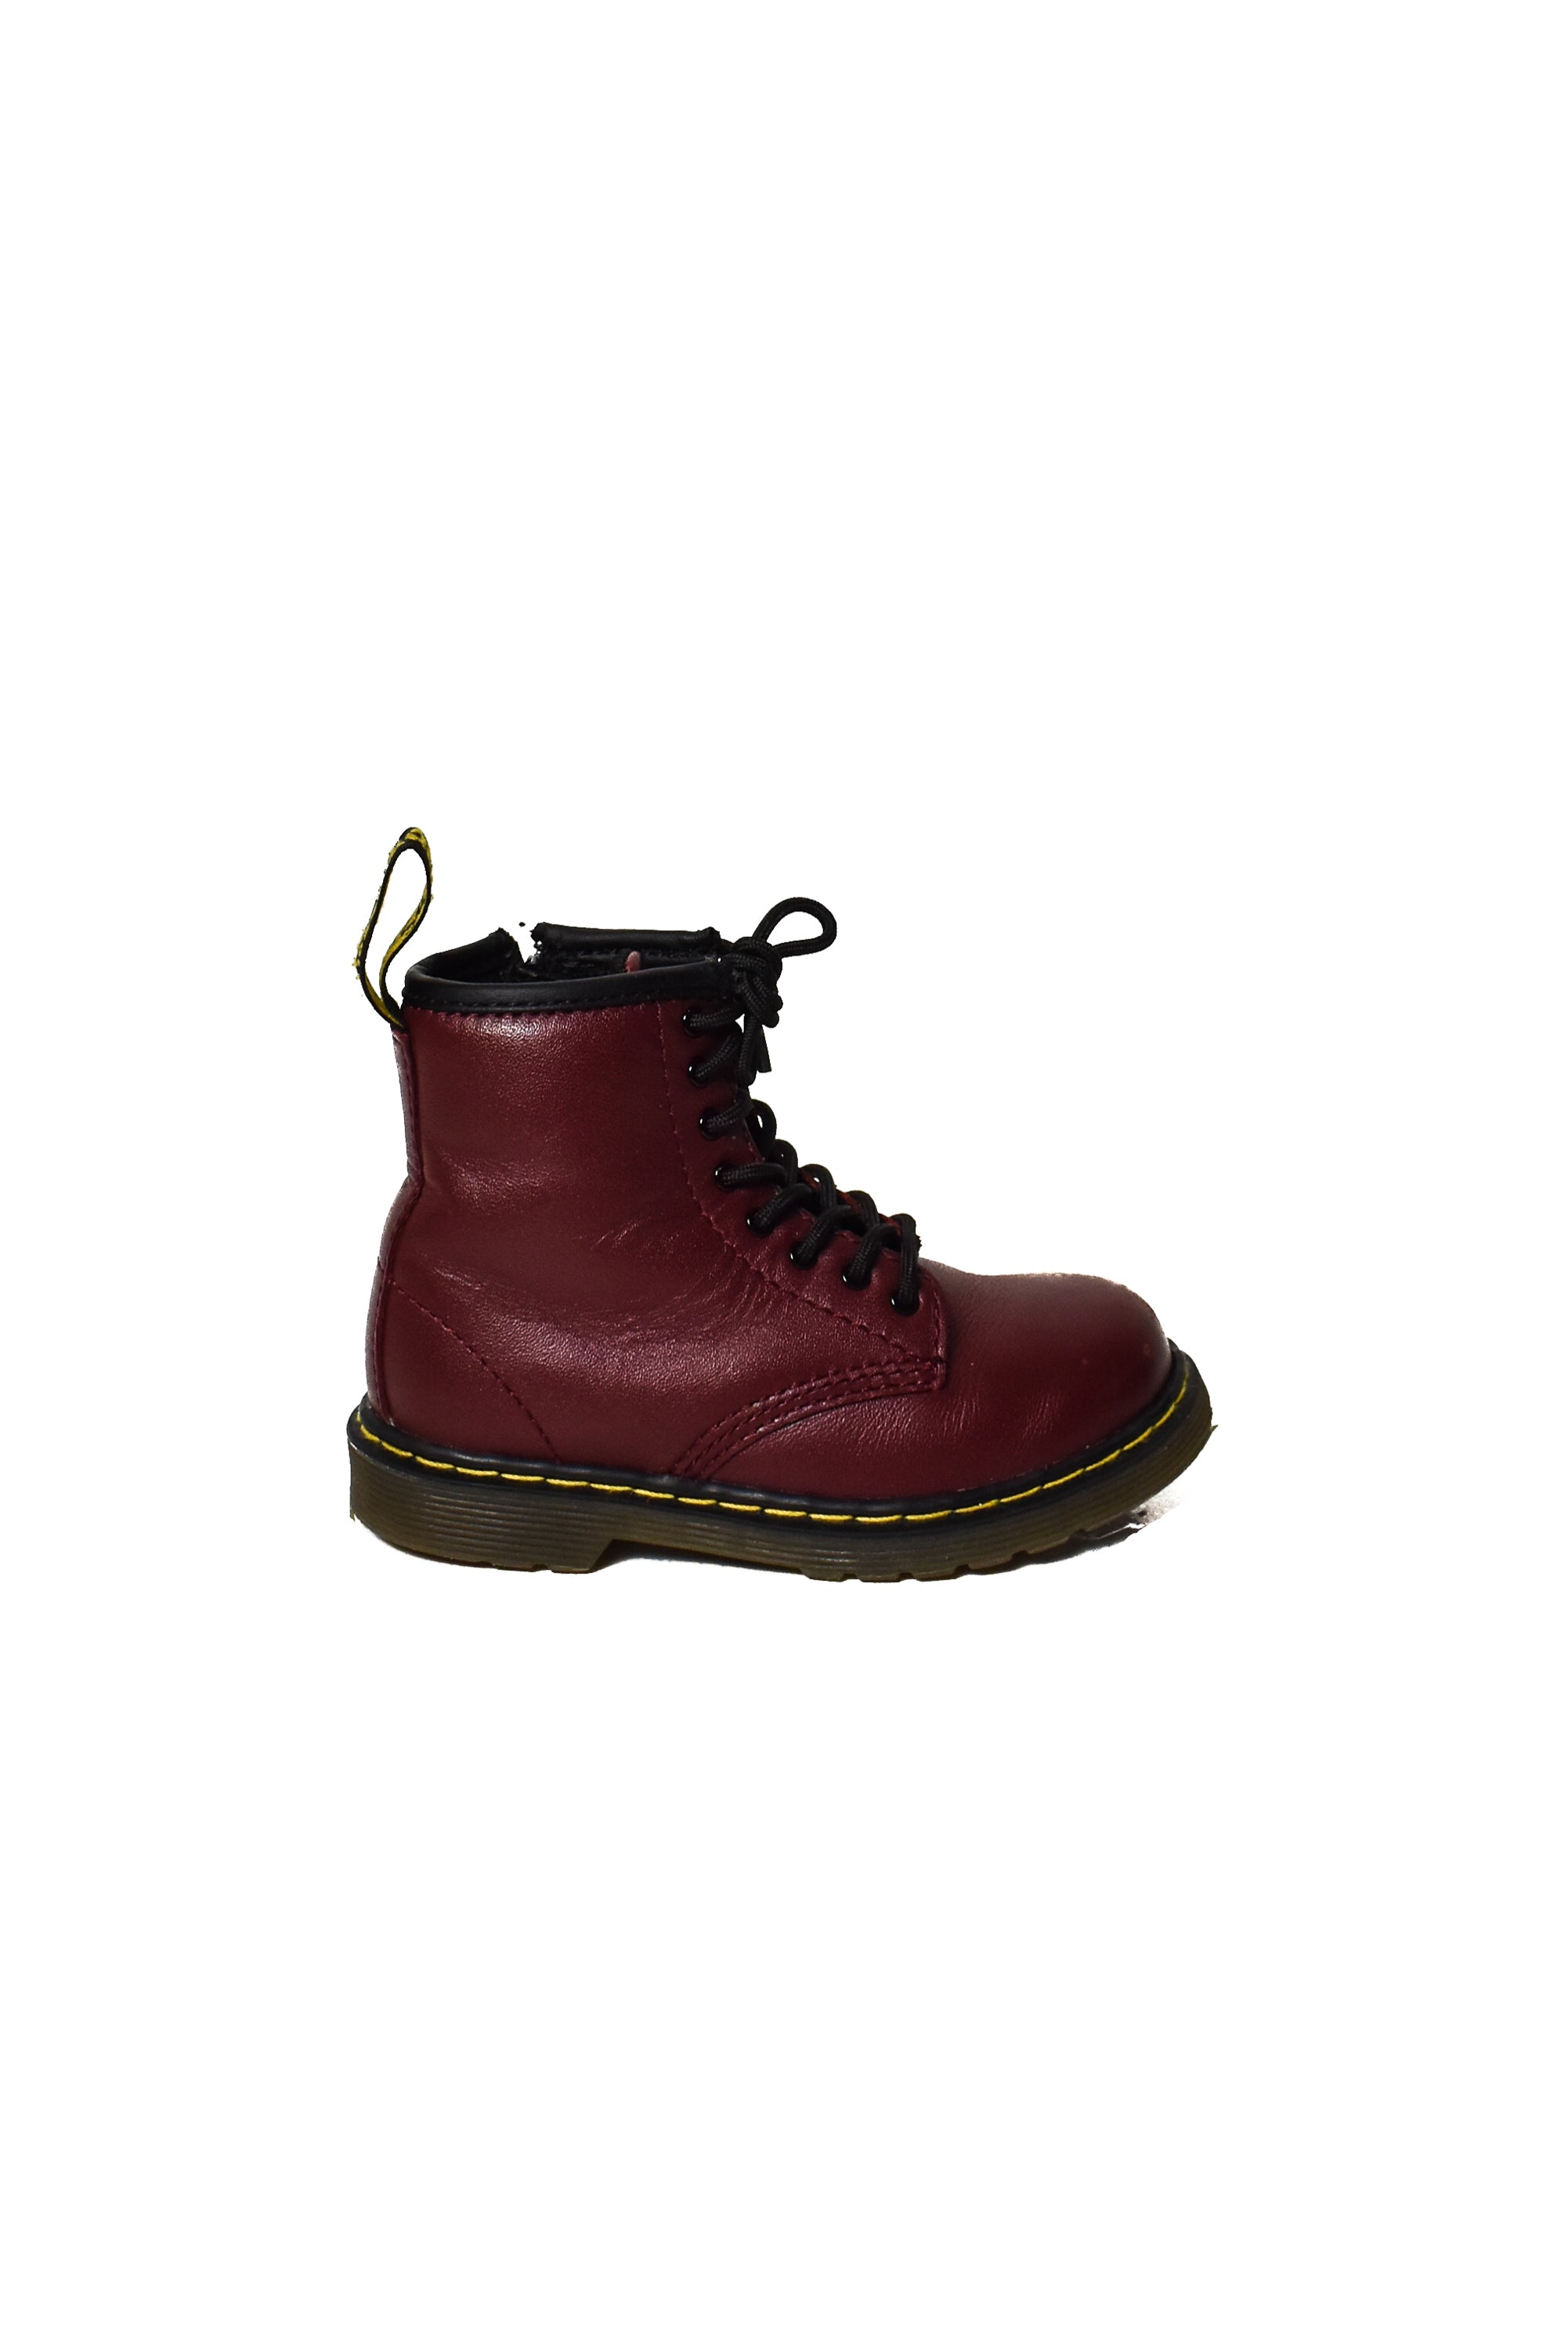 dr martens sold out